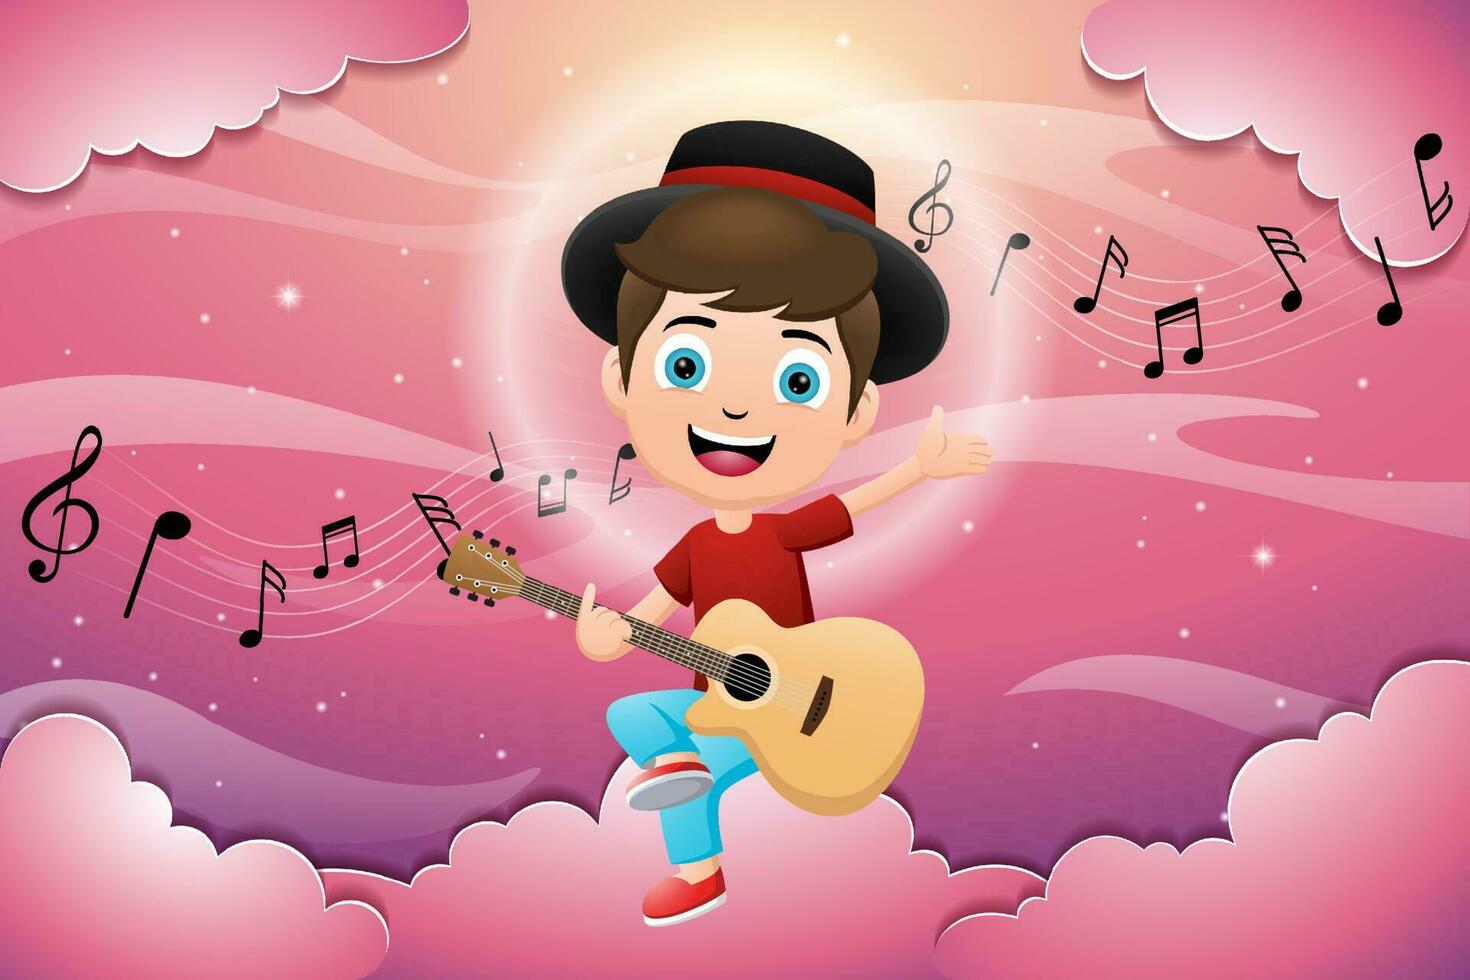 Cartoon of boy sitting on clouds while playing guitar on sky scene background vector